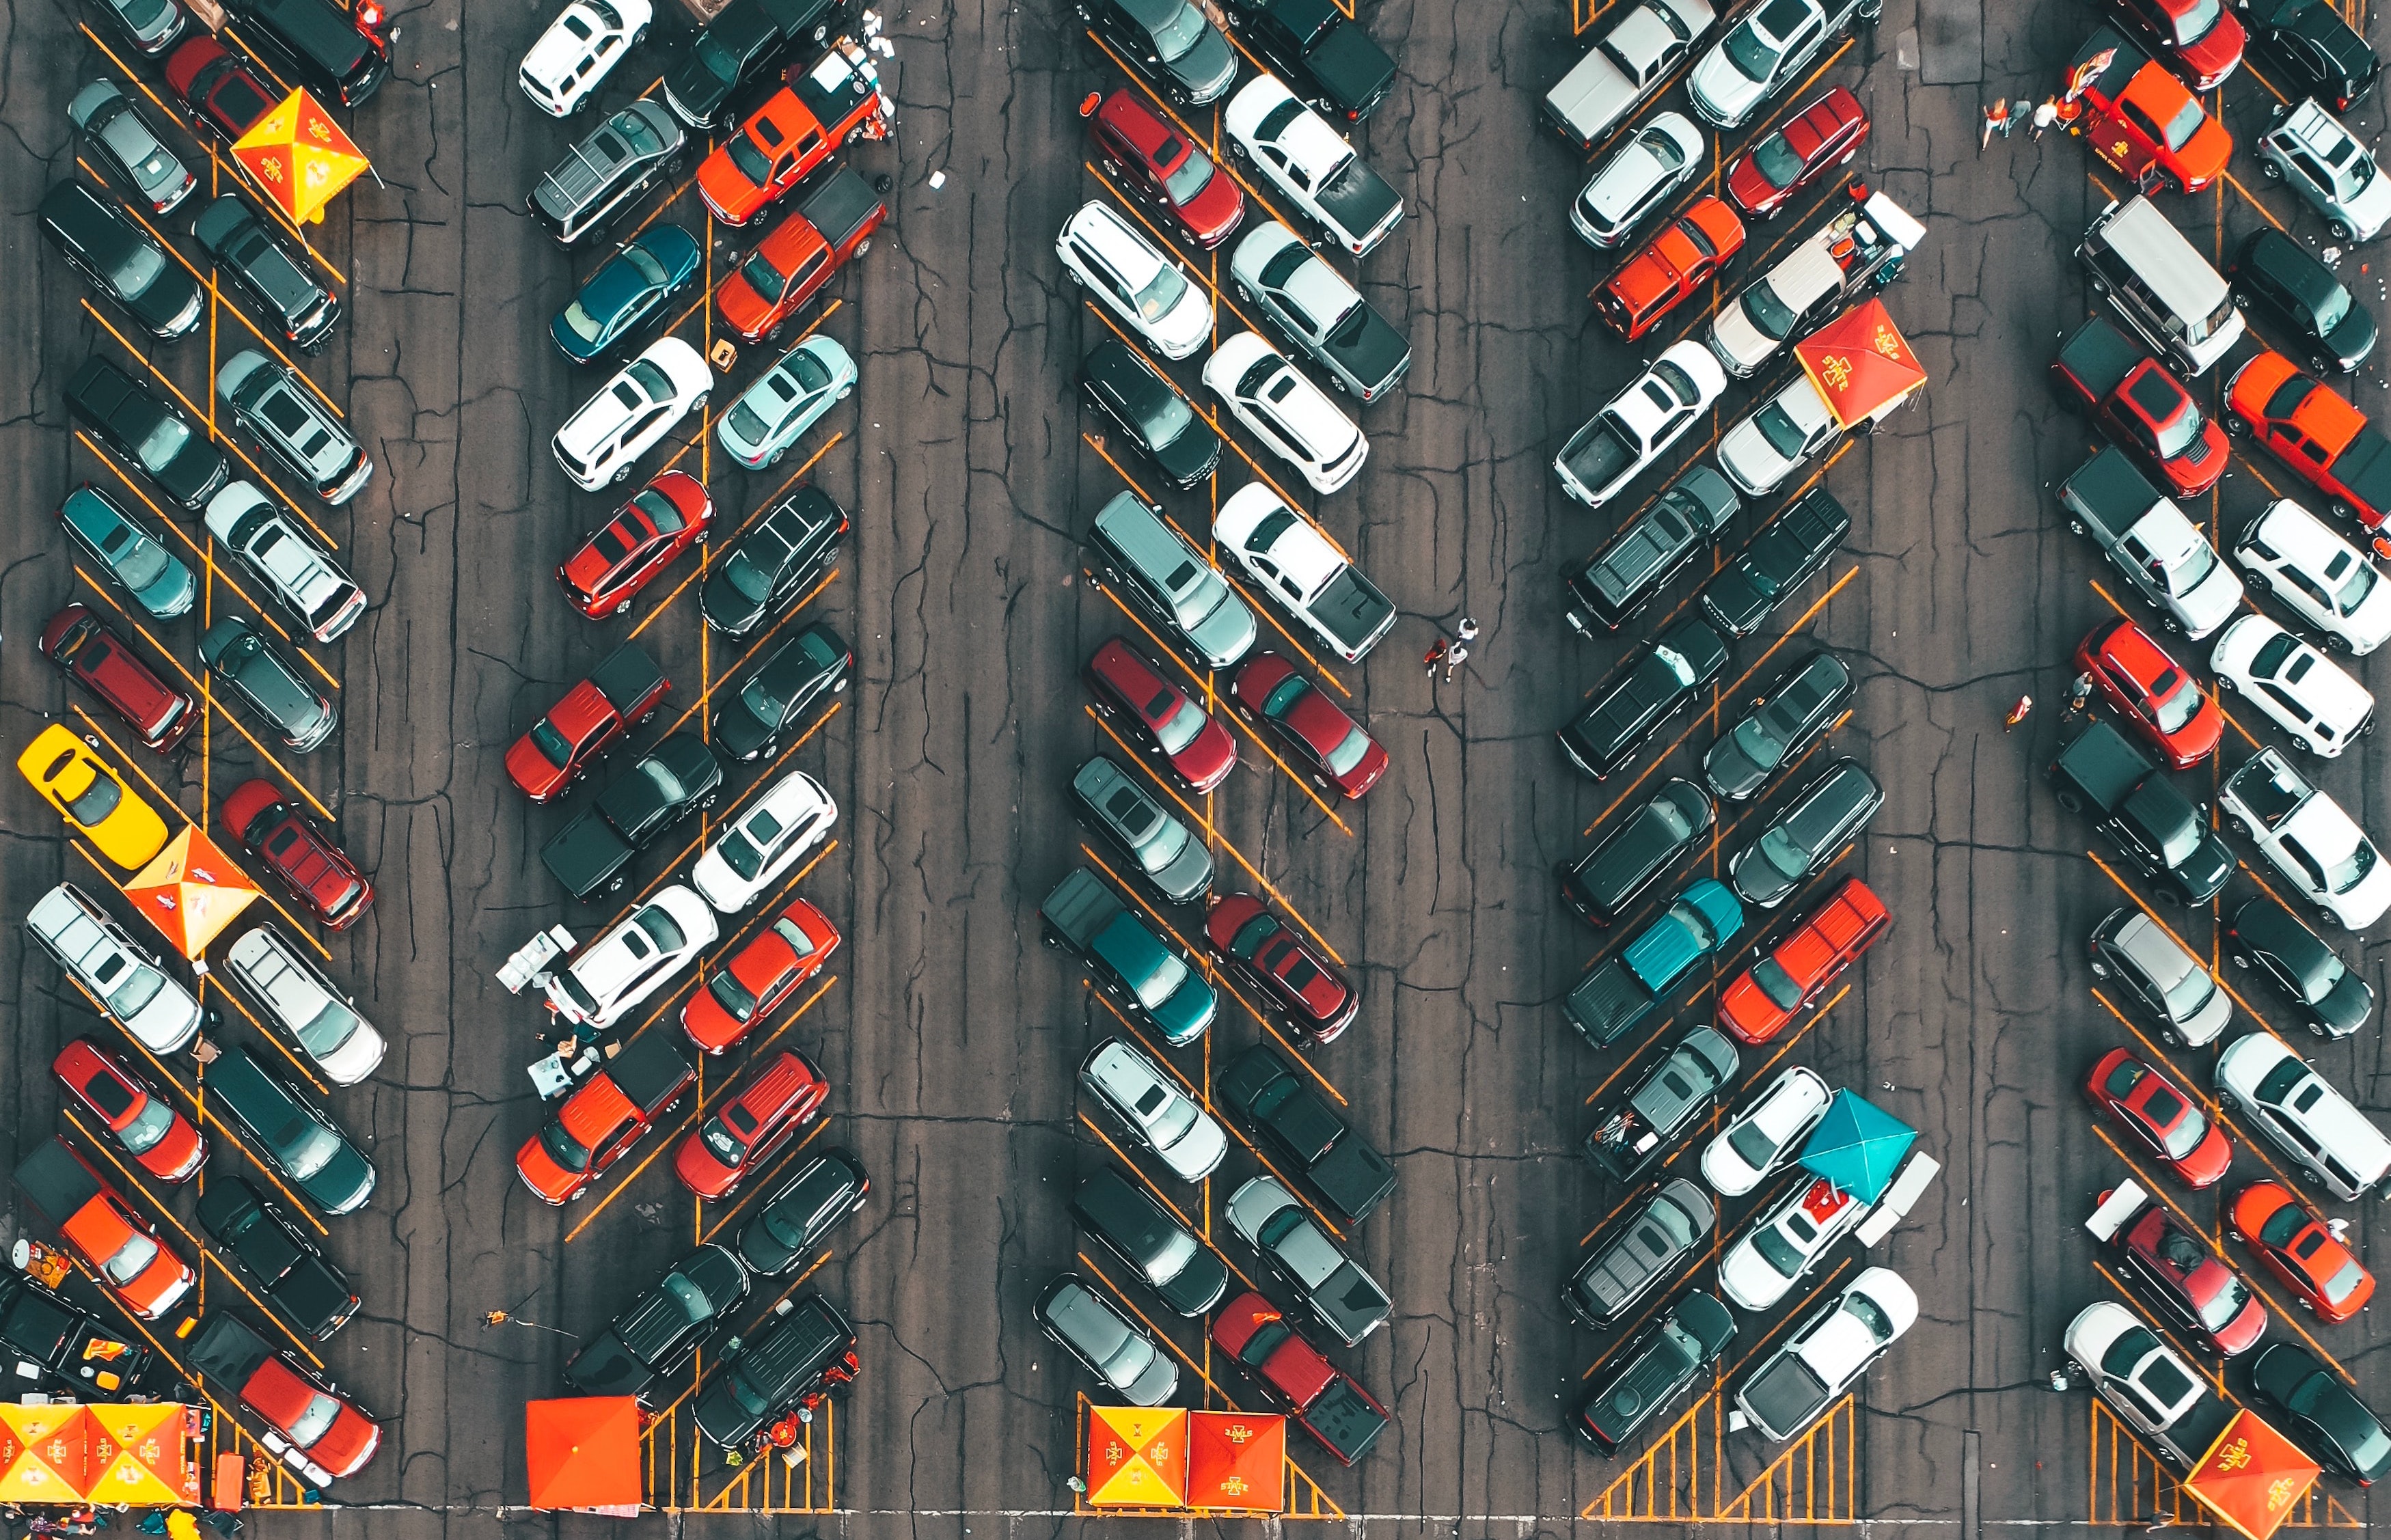 Competing for congestible goods: experimental evidence on parking choice